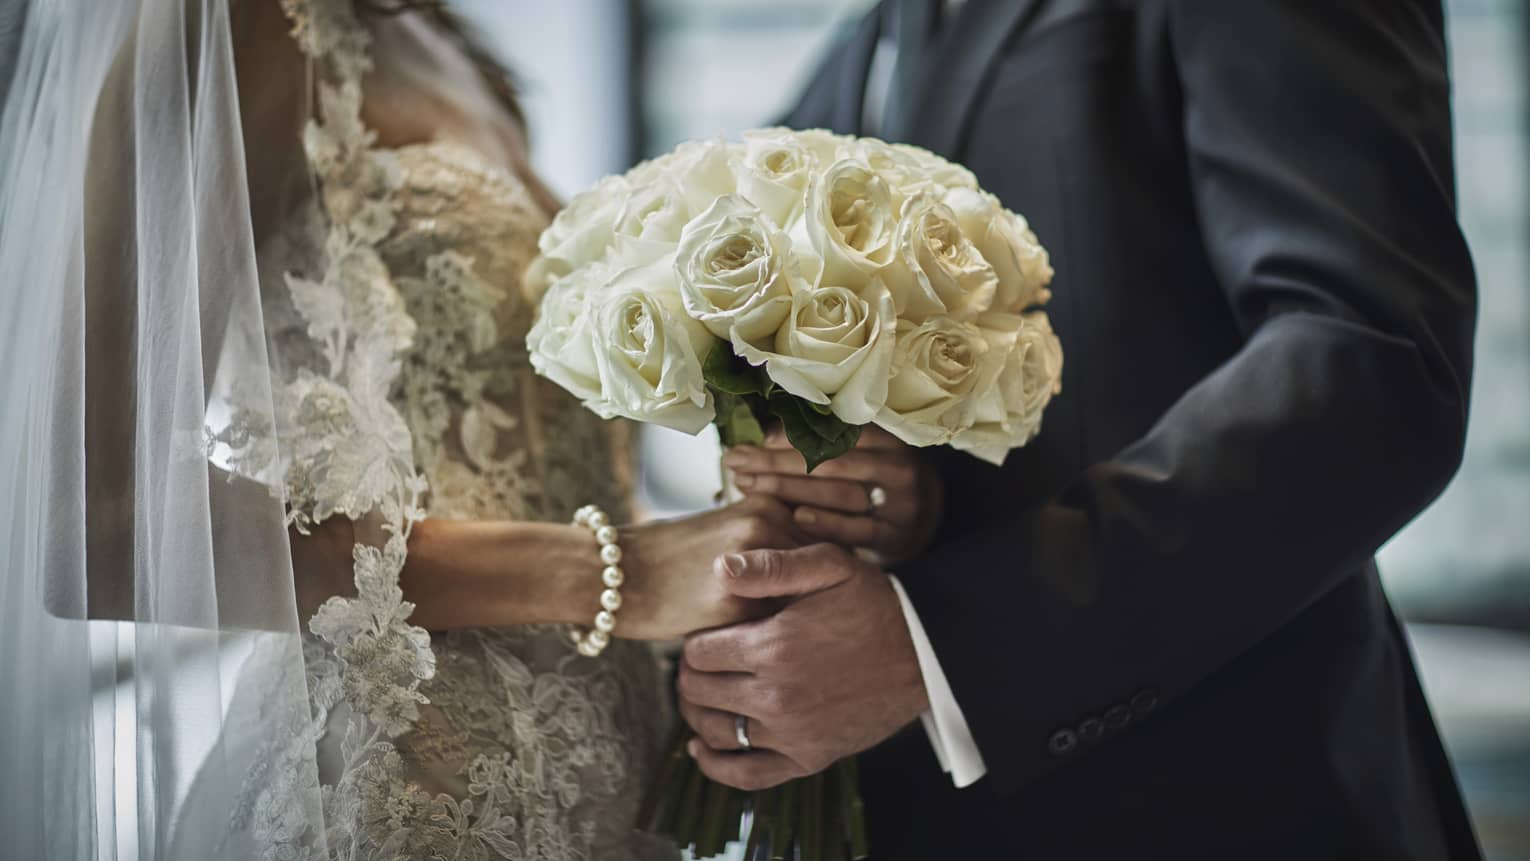 A close up of a bride in a lace gown and a groom in a gray suit hold the bride's bouquet of white roses together.